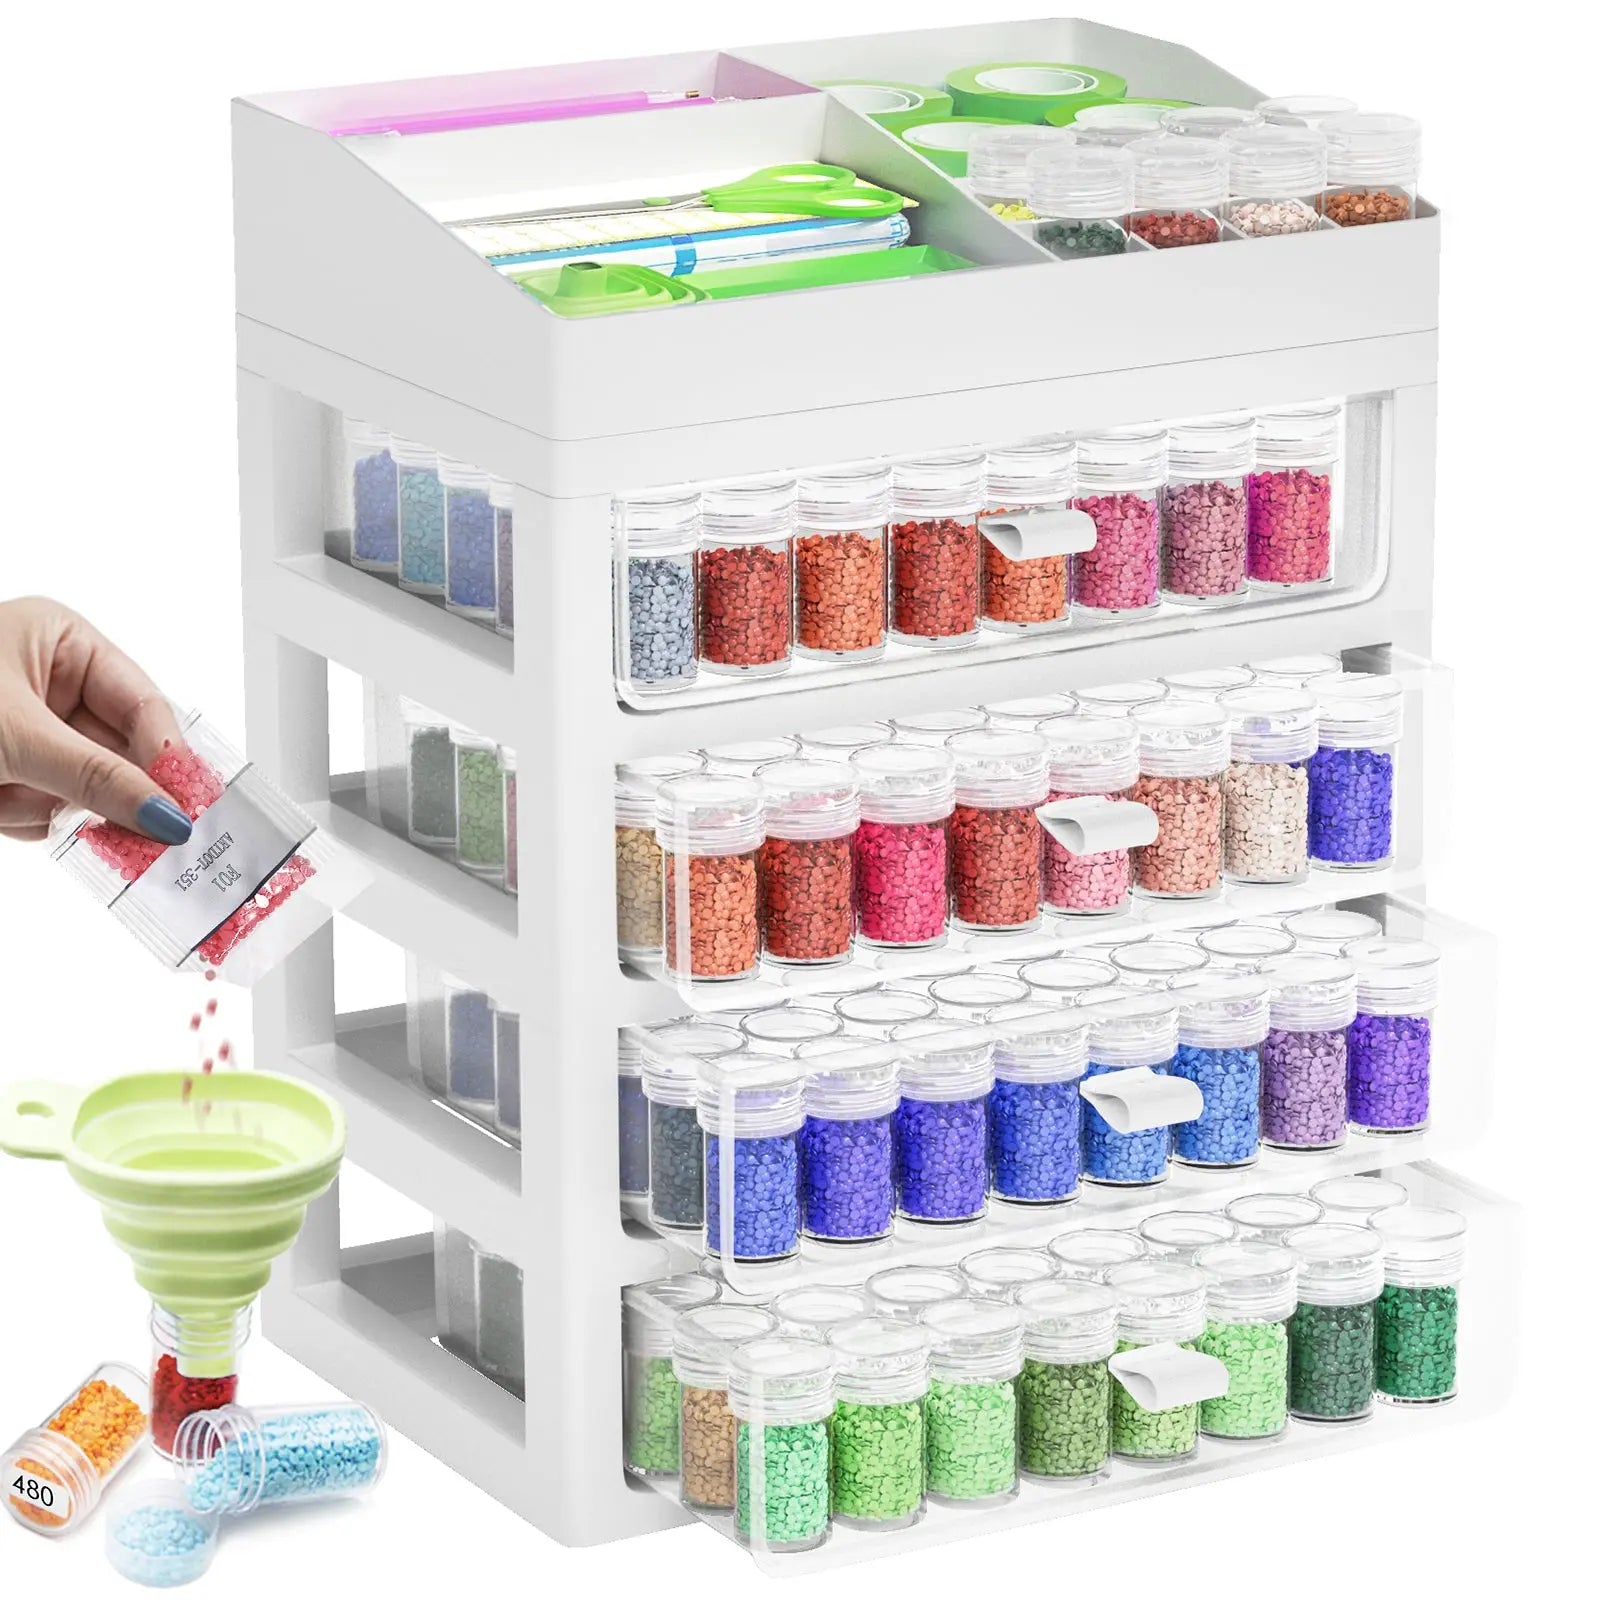  ARTDOT Diamond Painting Storage Boxes, 120 Slots Bead Storage  with 5D Diamond Art Accessories and Tools Kit : Arts, Crafts & Sewing